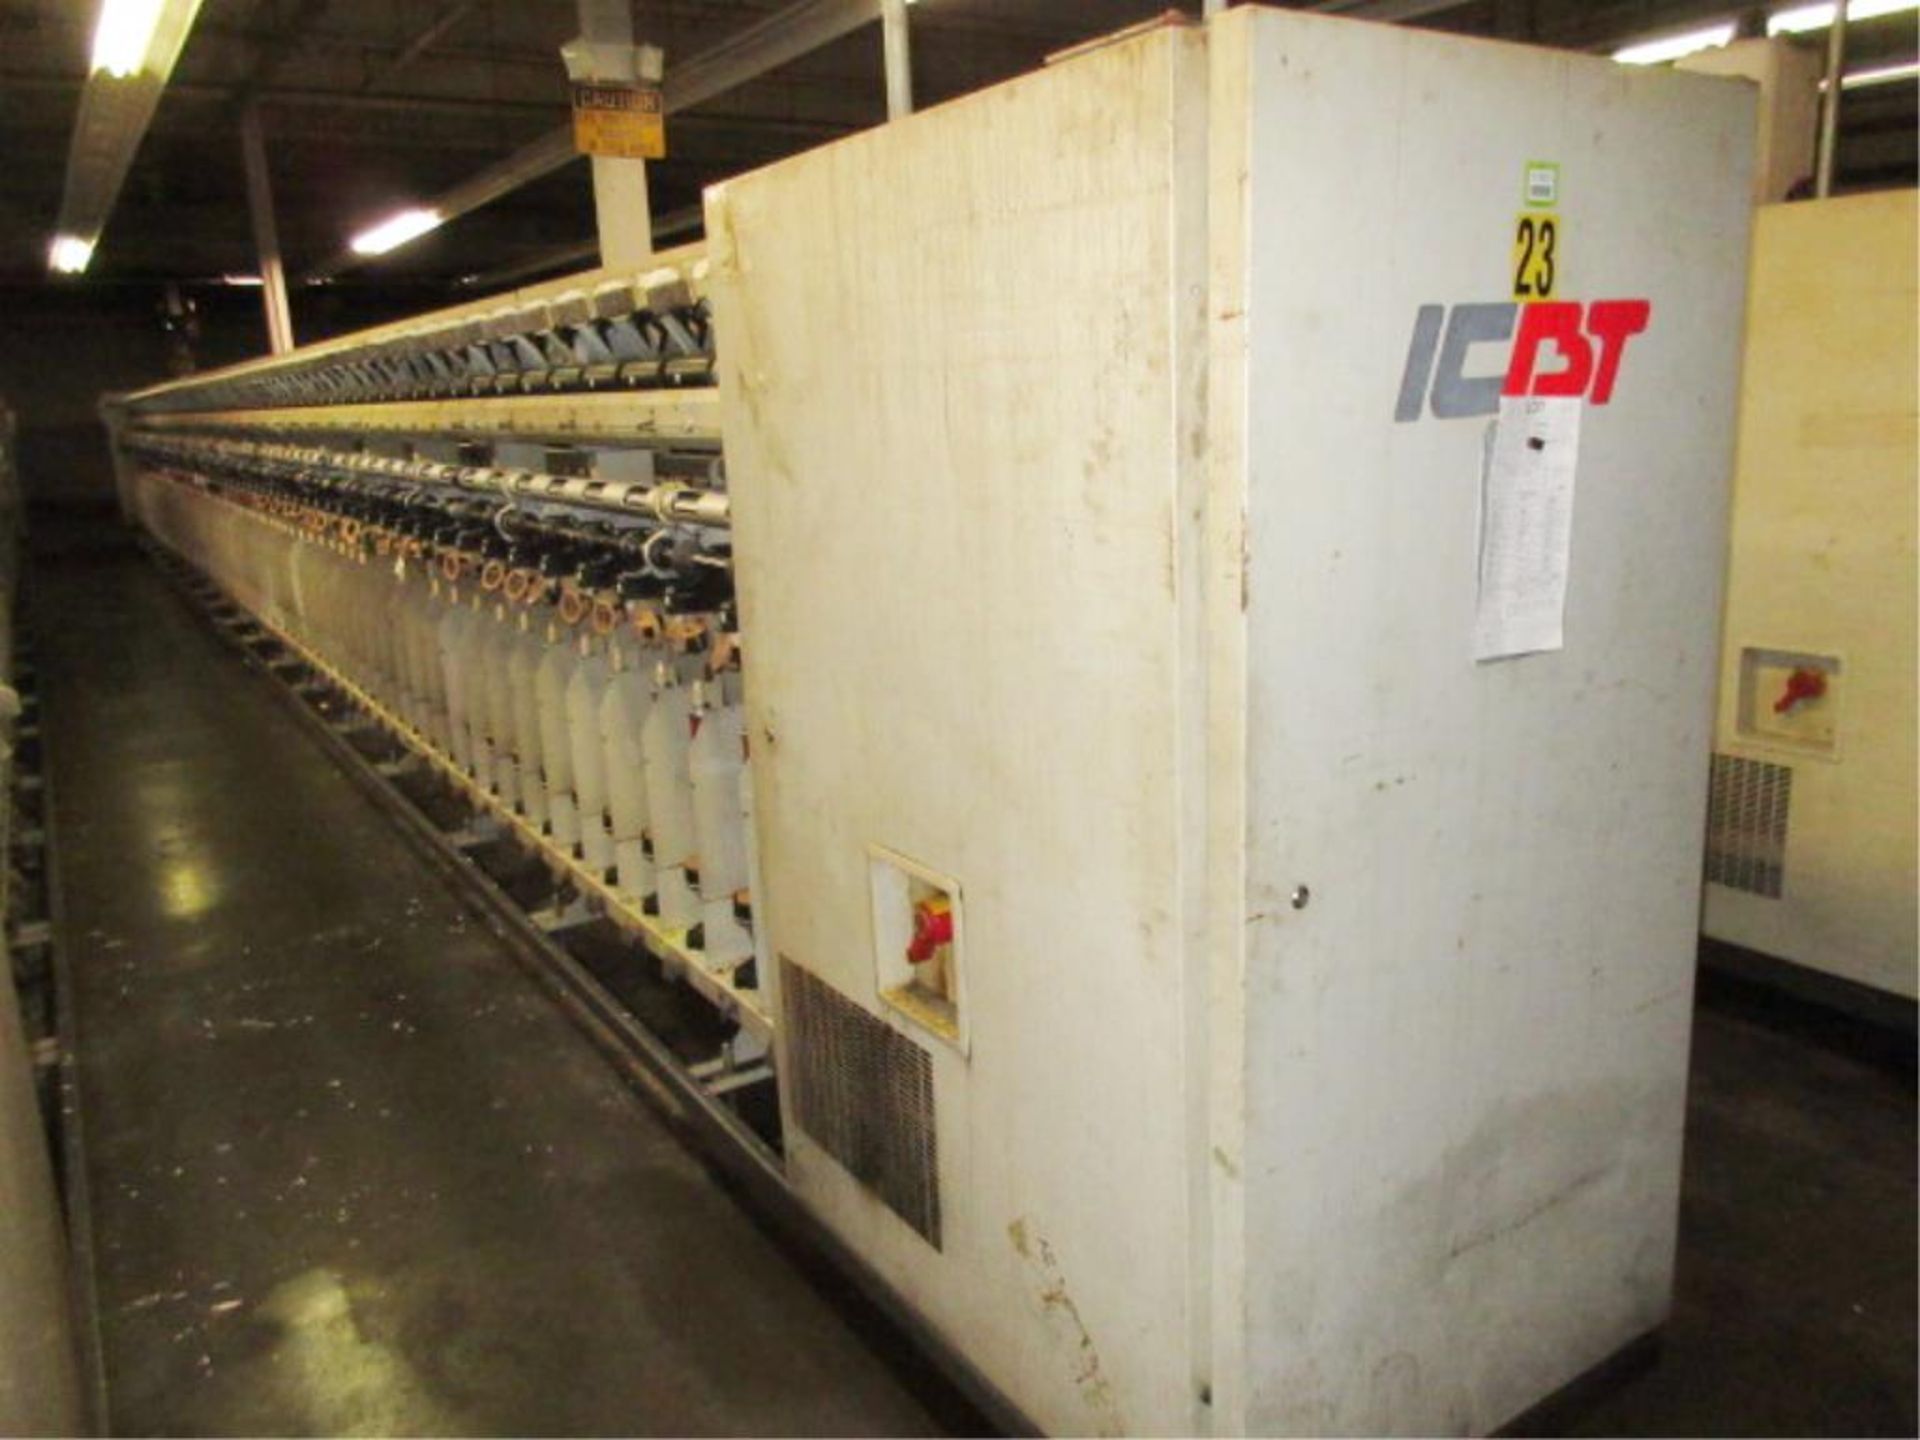 ICBT DT360 2X1 Twister, (1995), 144 spindles, can run with oil trough, said to be in running - Image 2 of 9